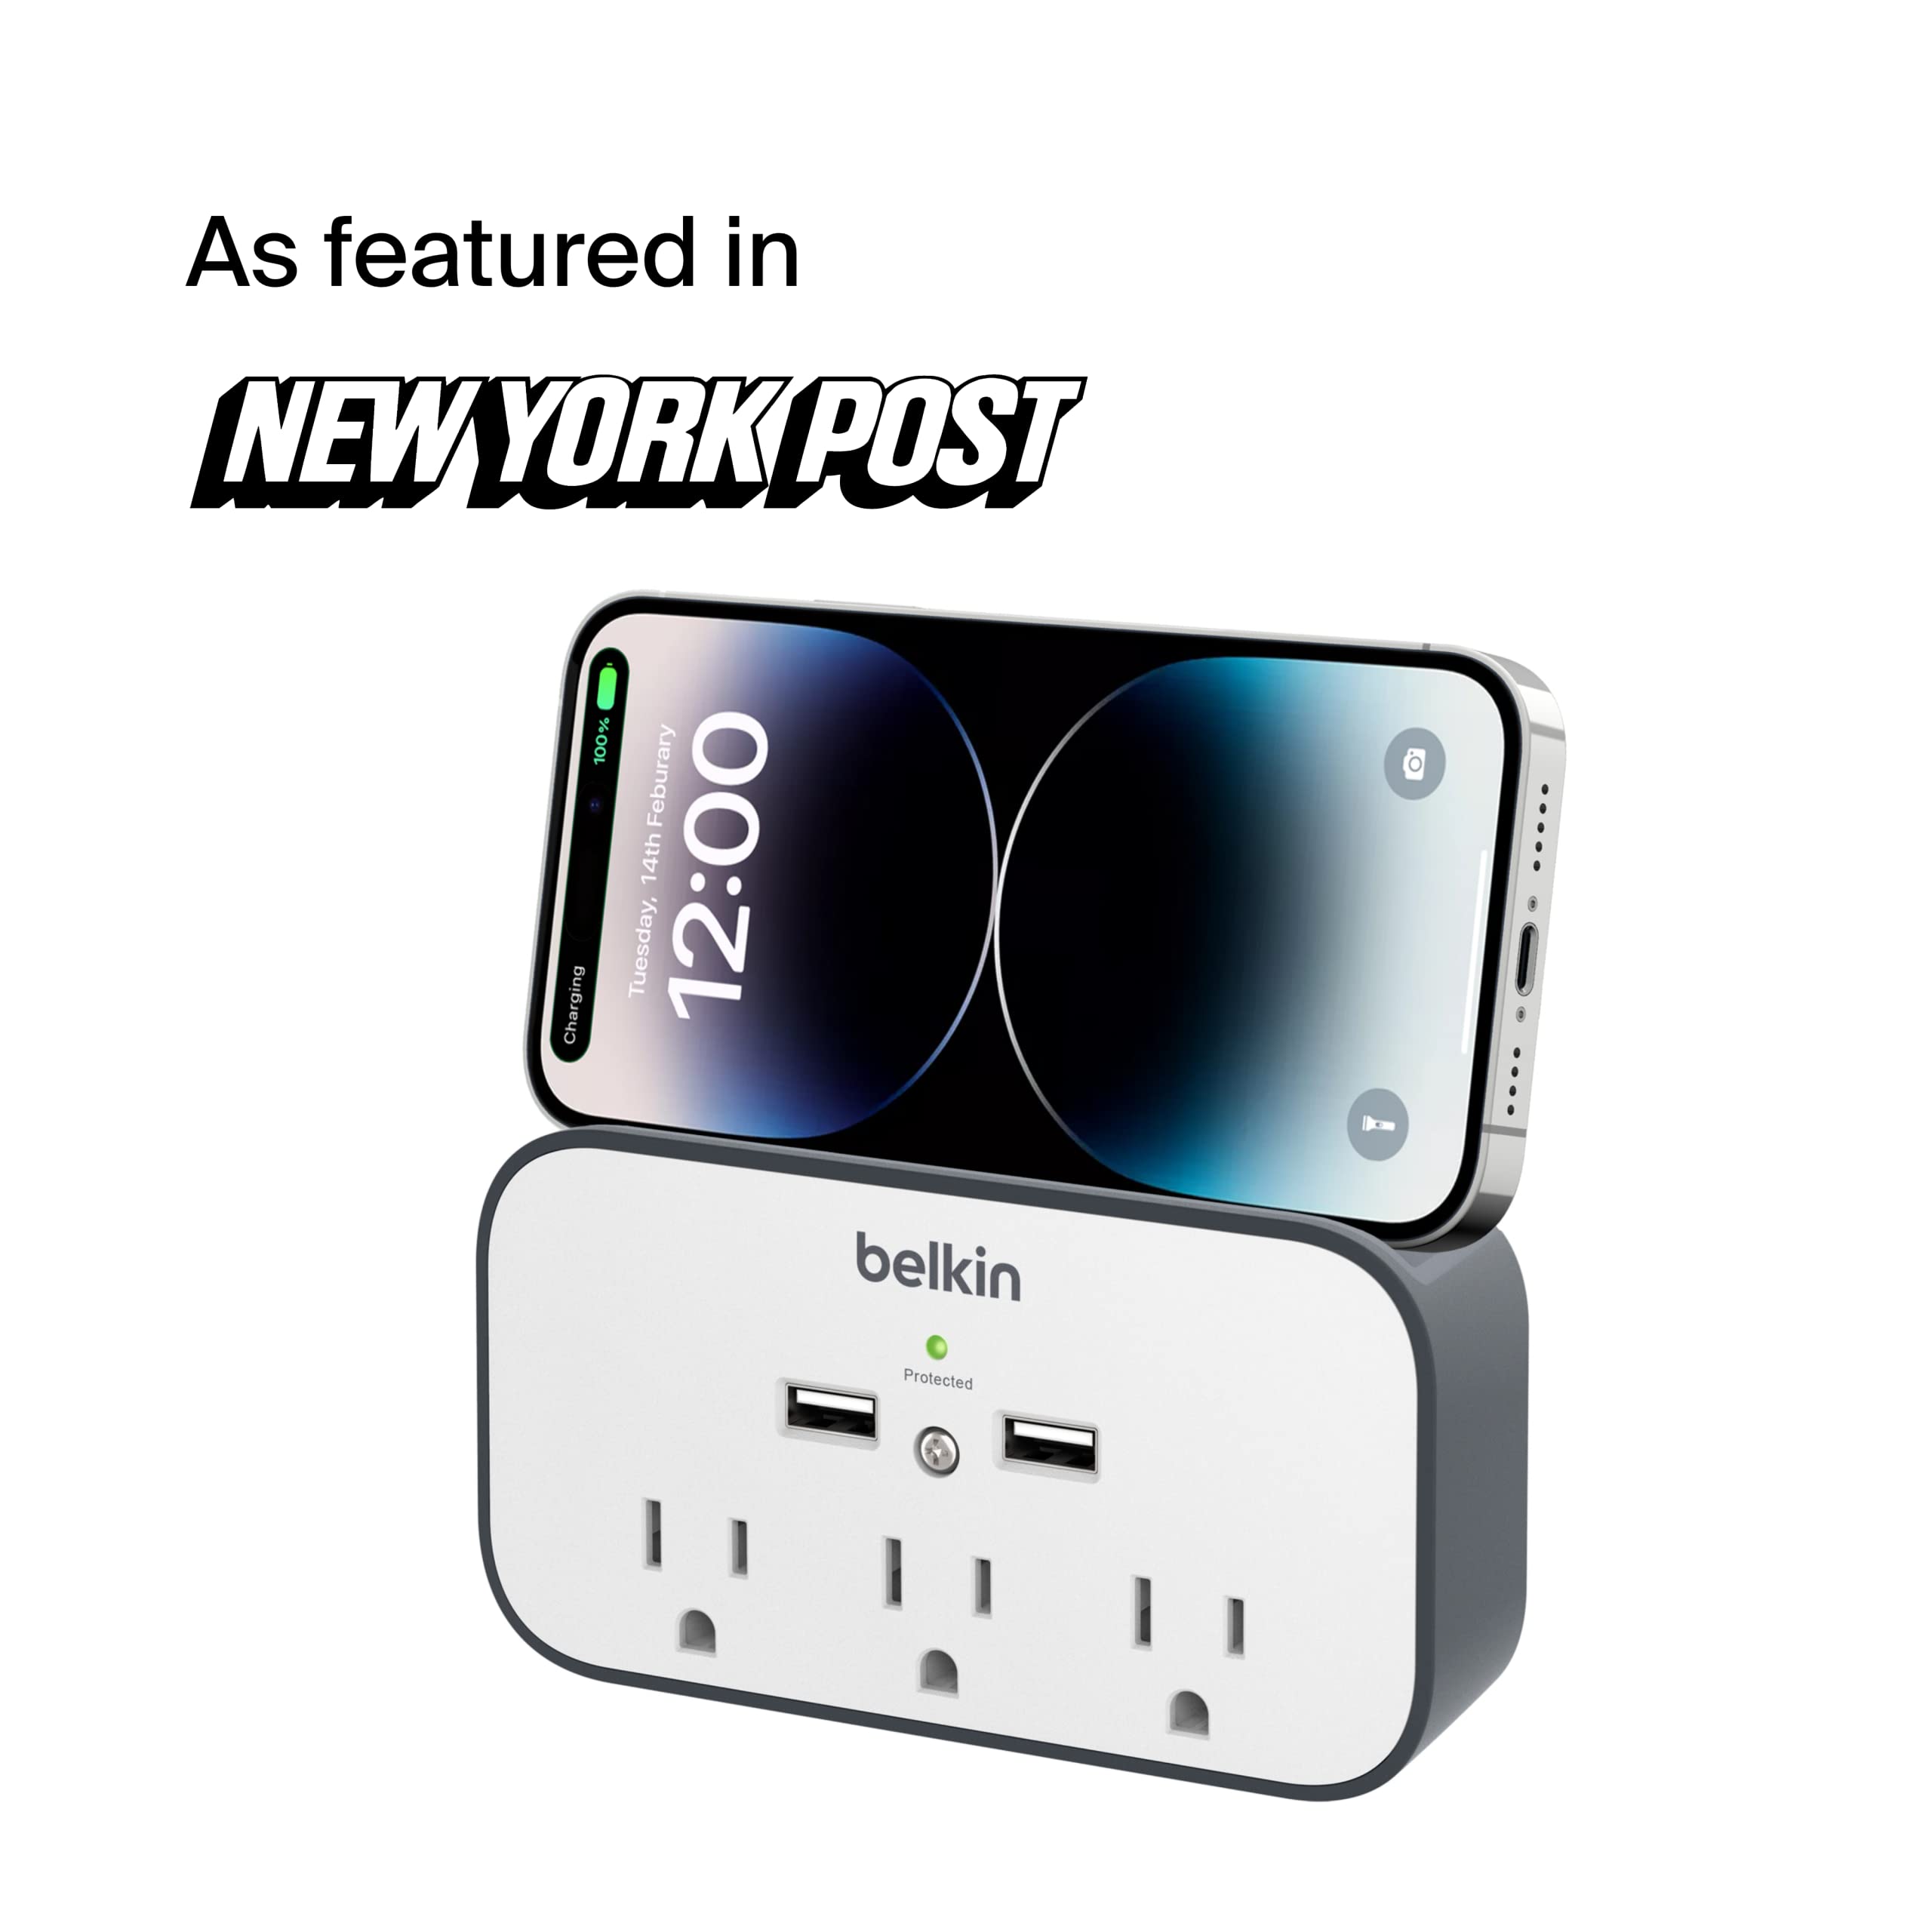 Belkin Wall Surge Protector - 3 Outlet Surge Protector w/ 2 USB Ports - Wall Mount Surge Protector with Premium Protection Against Surges - Safe Charge for Mobile Devices, Tablets & More (540 Joules)